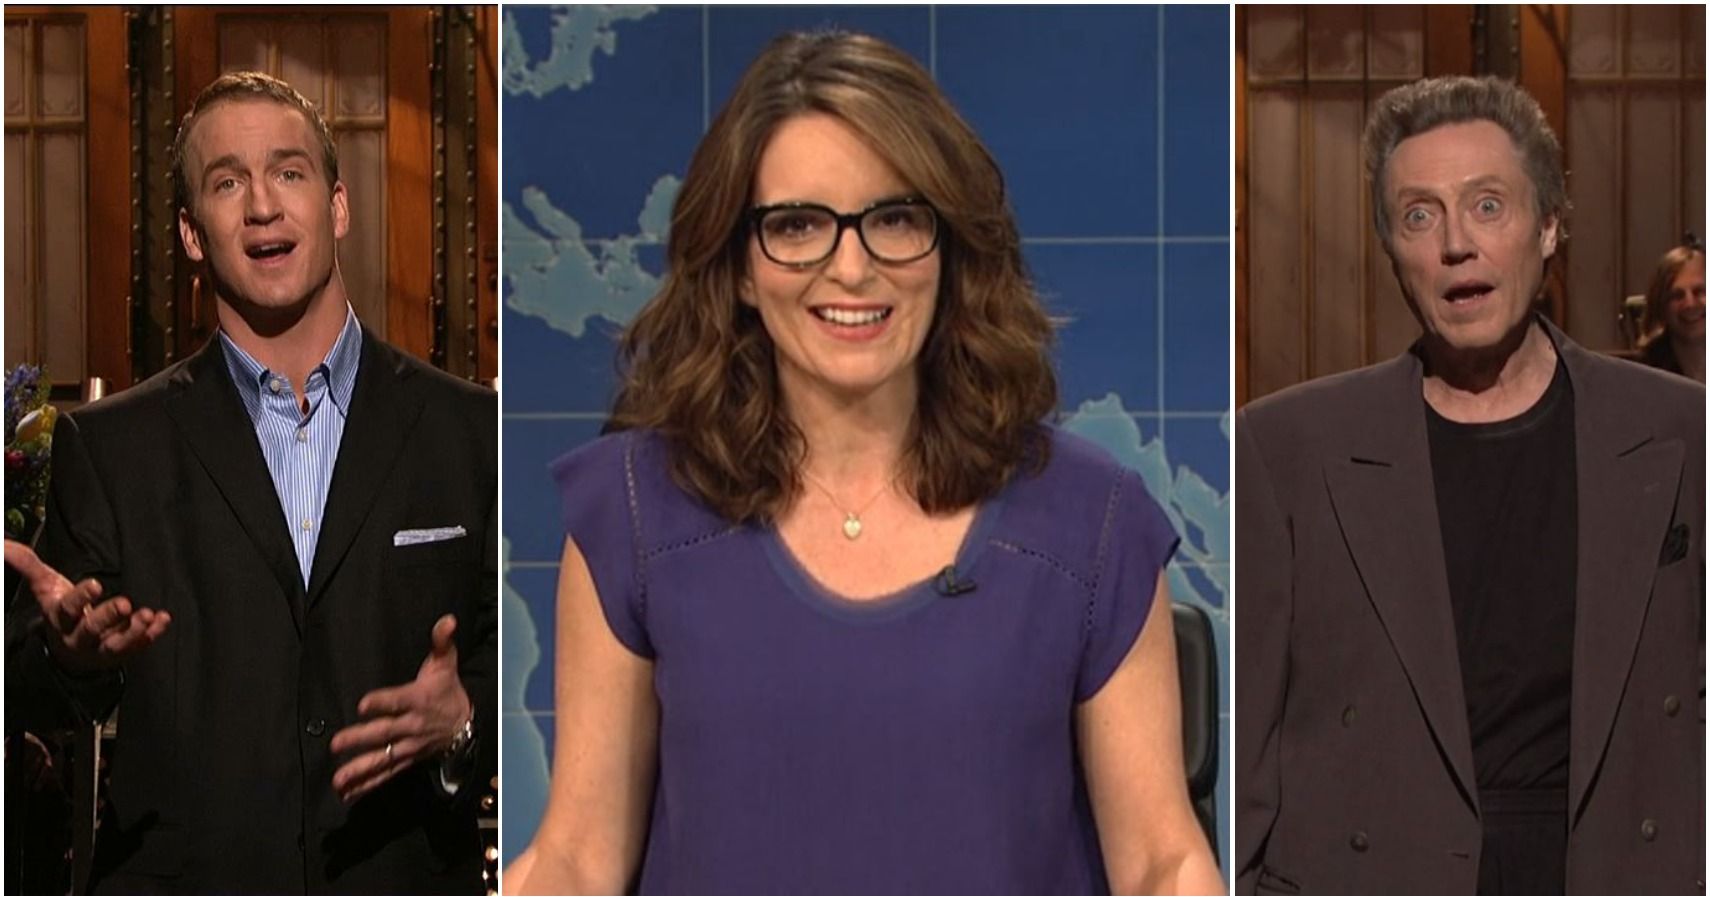 The 10 Best SNL Hosts Of The 2000s, According To IMDb